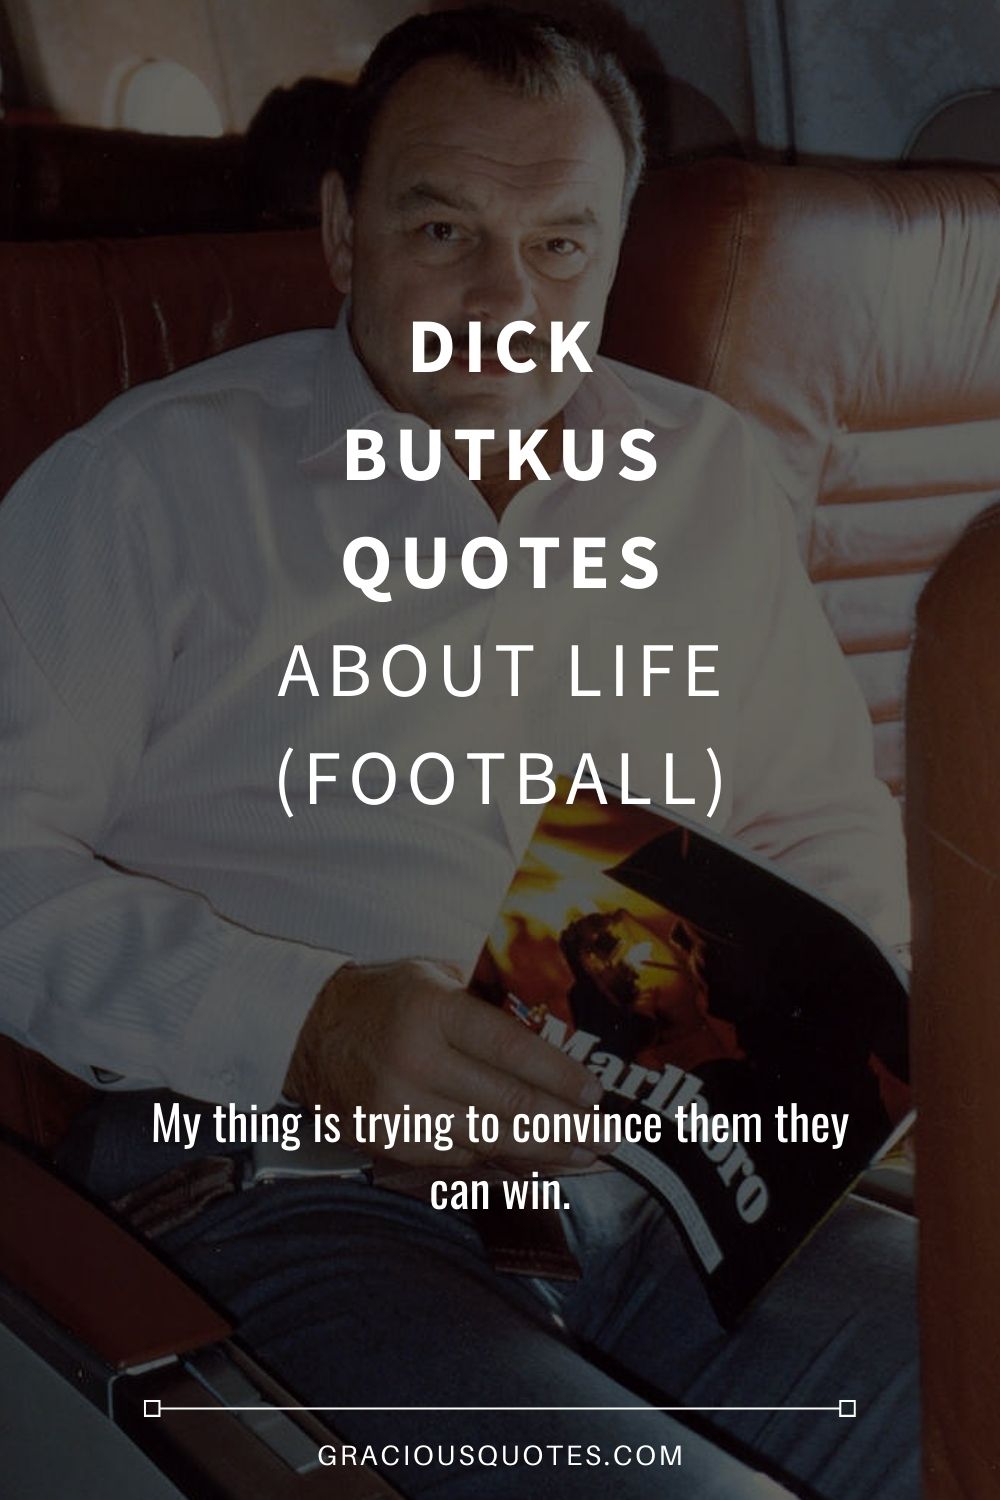 Top 15 Dick Butkus Quotes About Life (FOOTBALL) pic